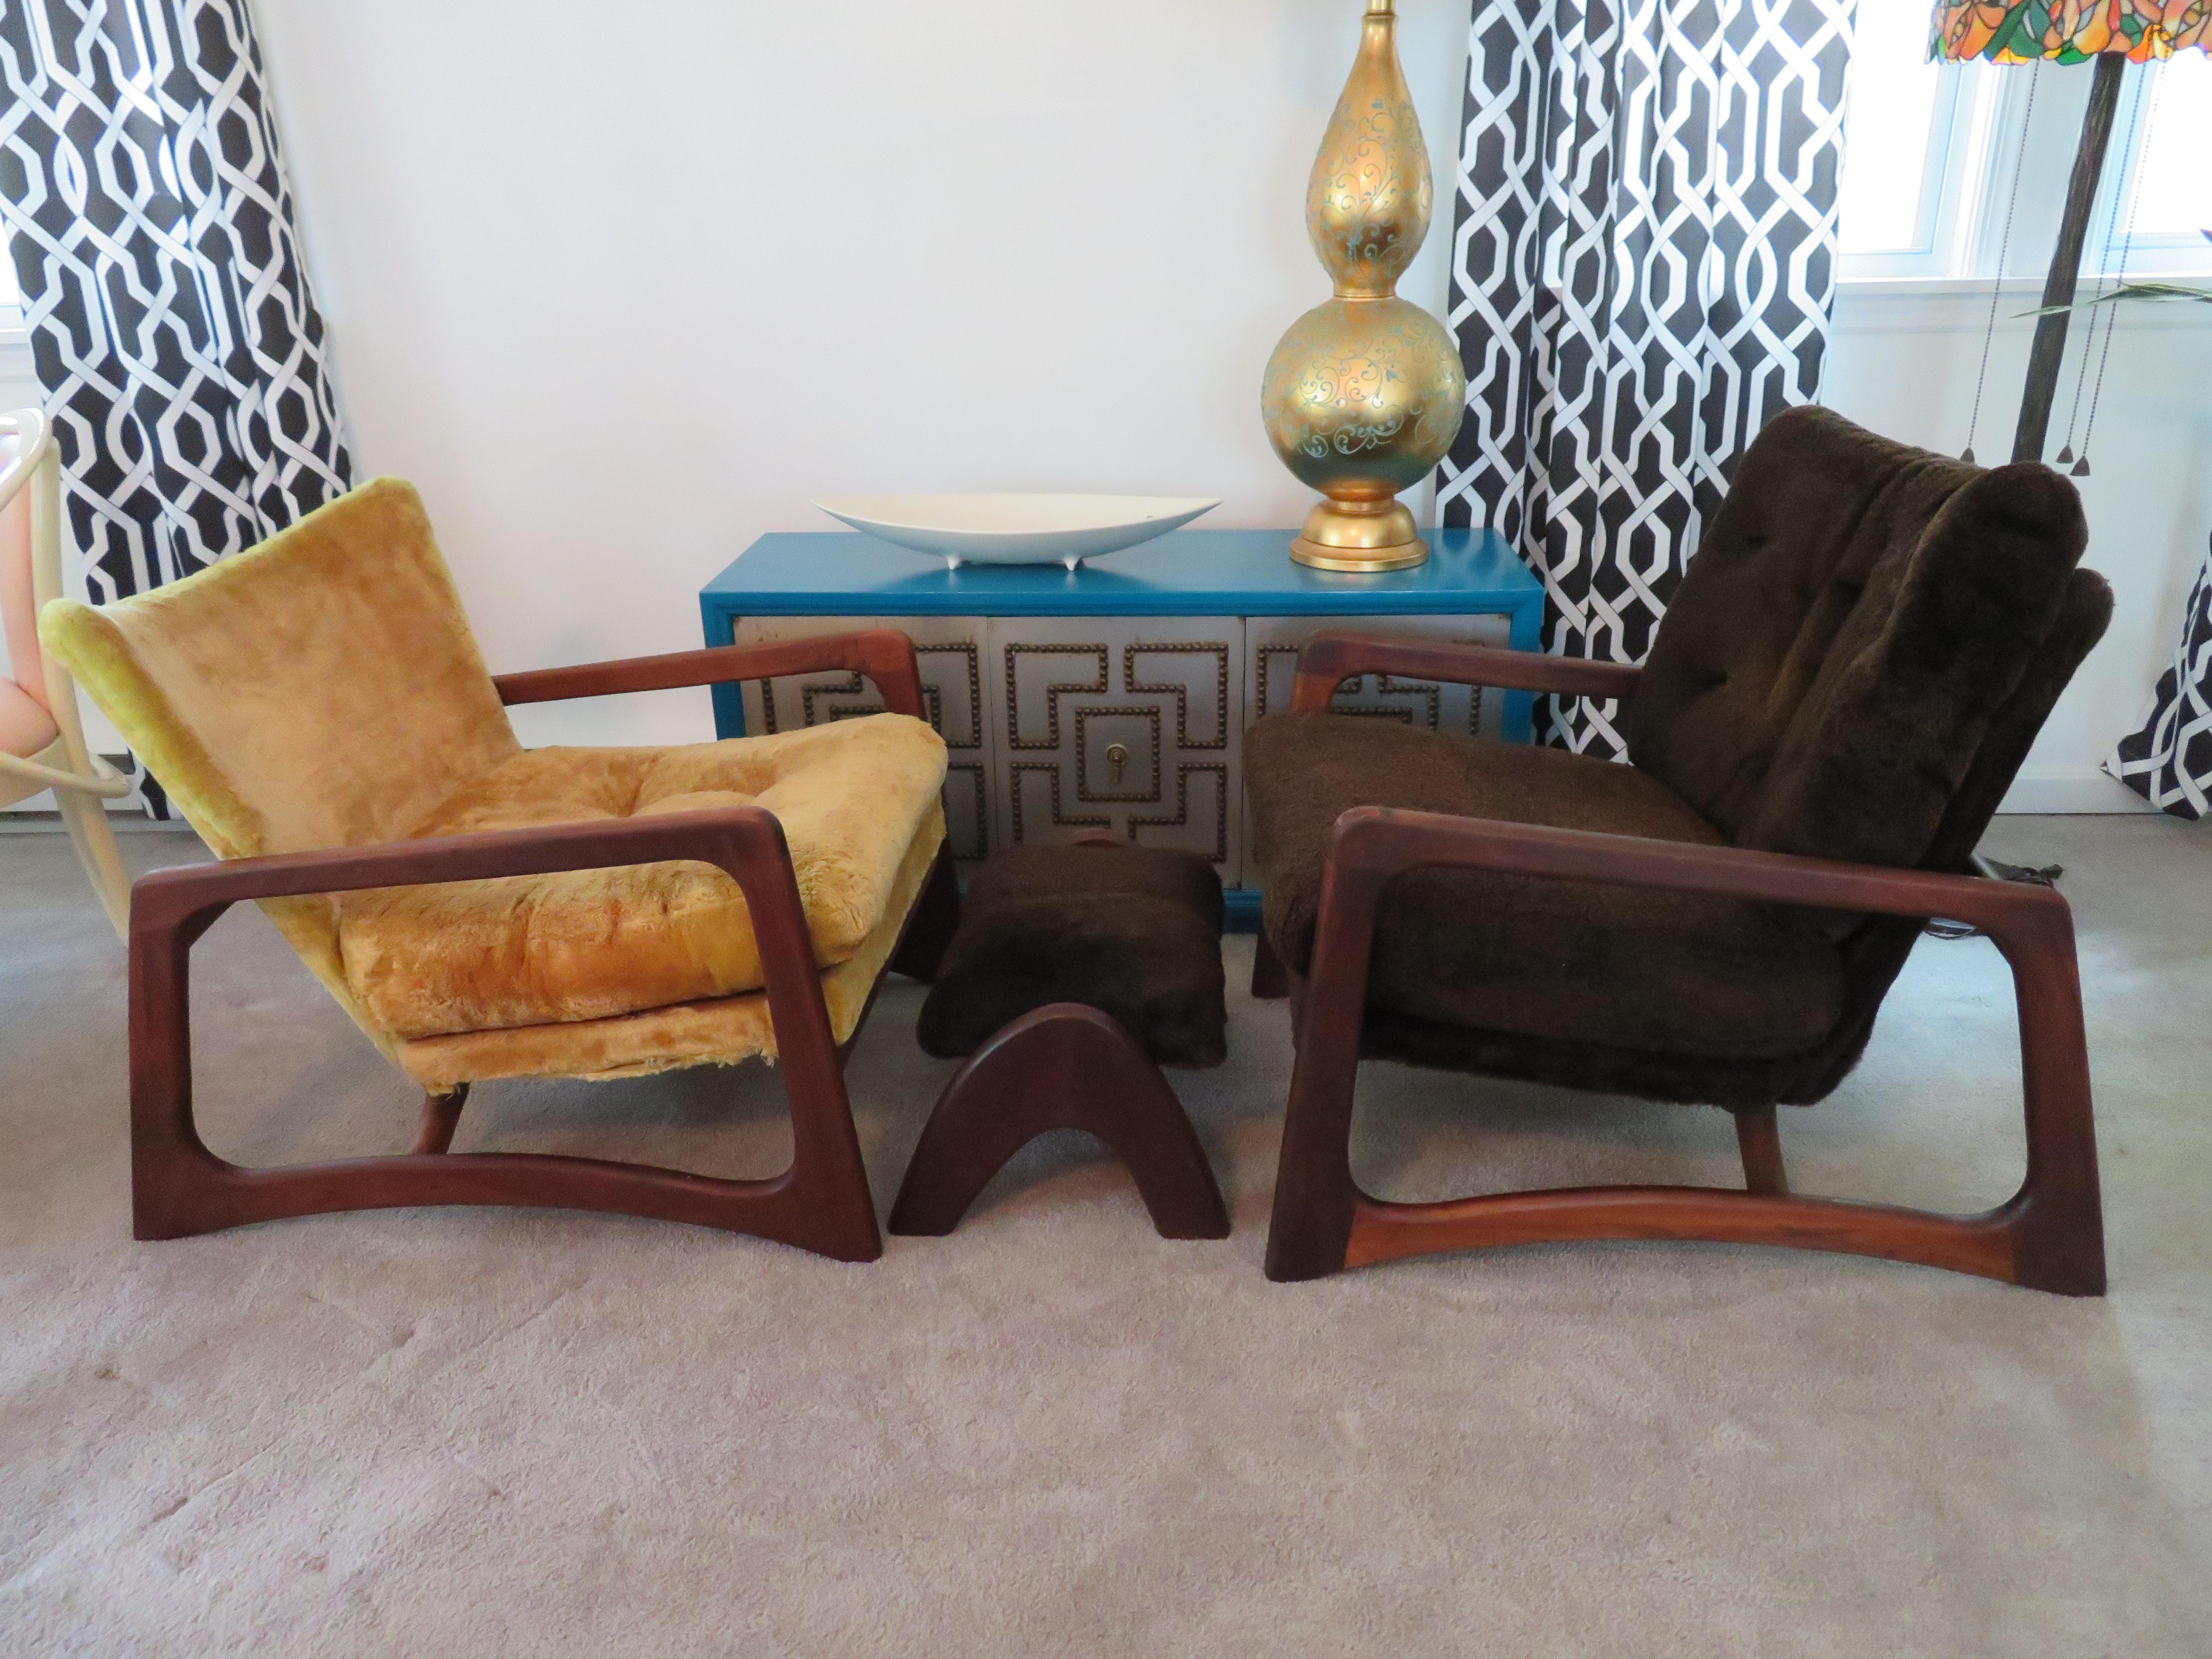 American Wonderful Pair of Adrian Pearsall Sculptural Walnut Lounge Chairs plus Ottoman For Sale